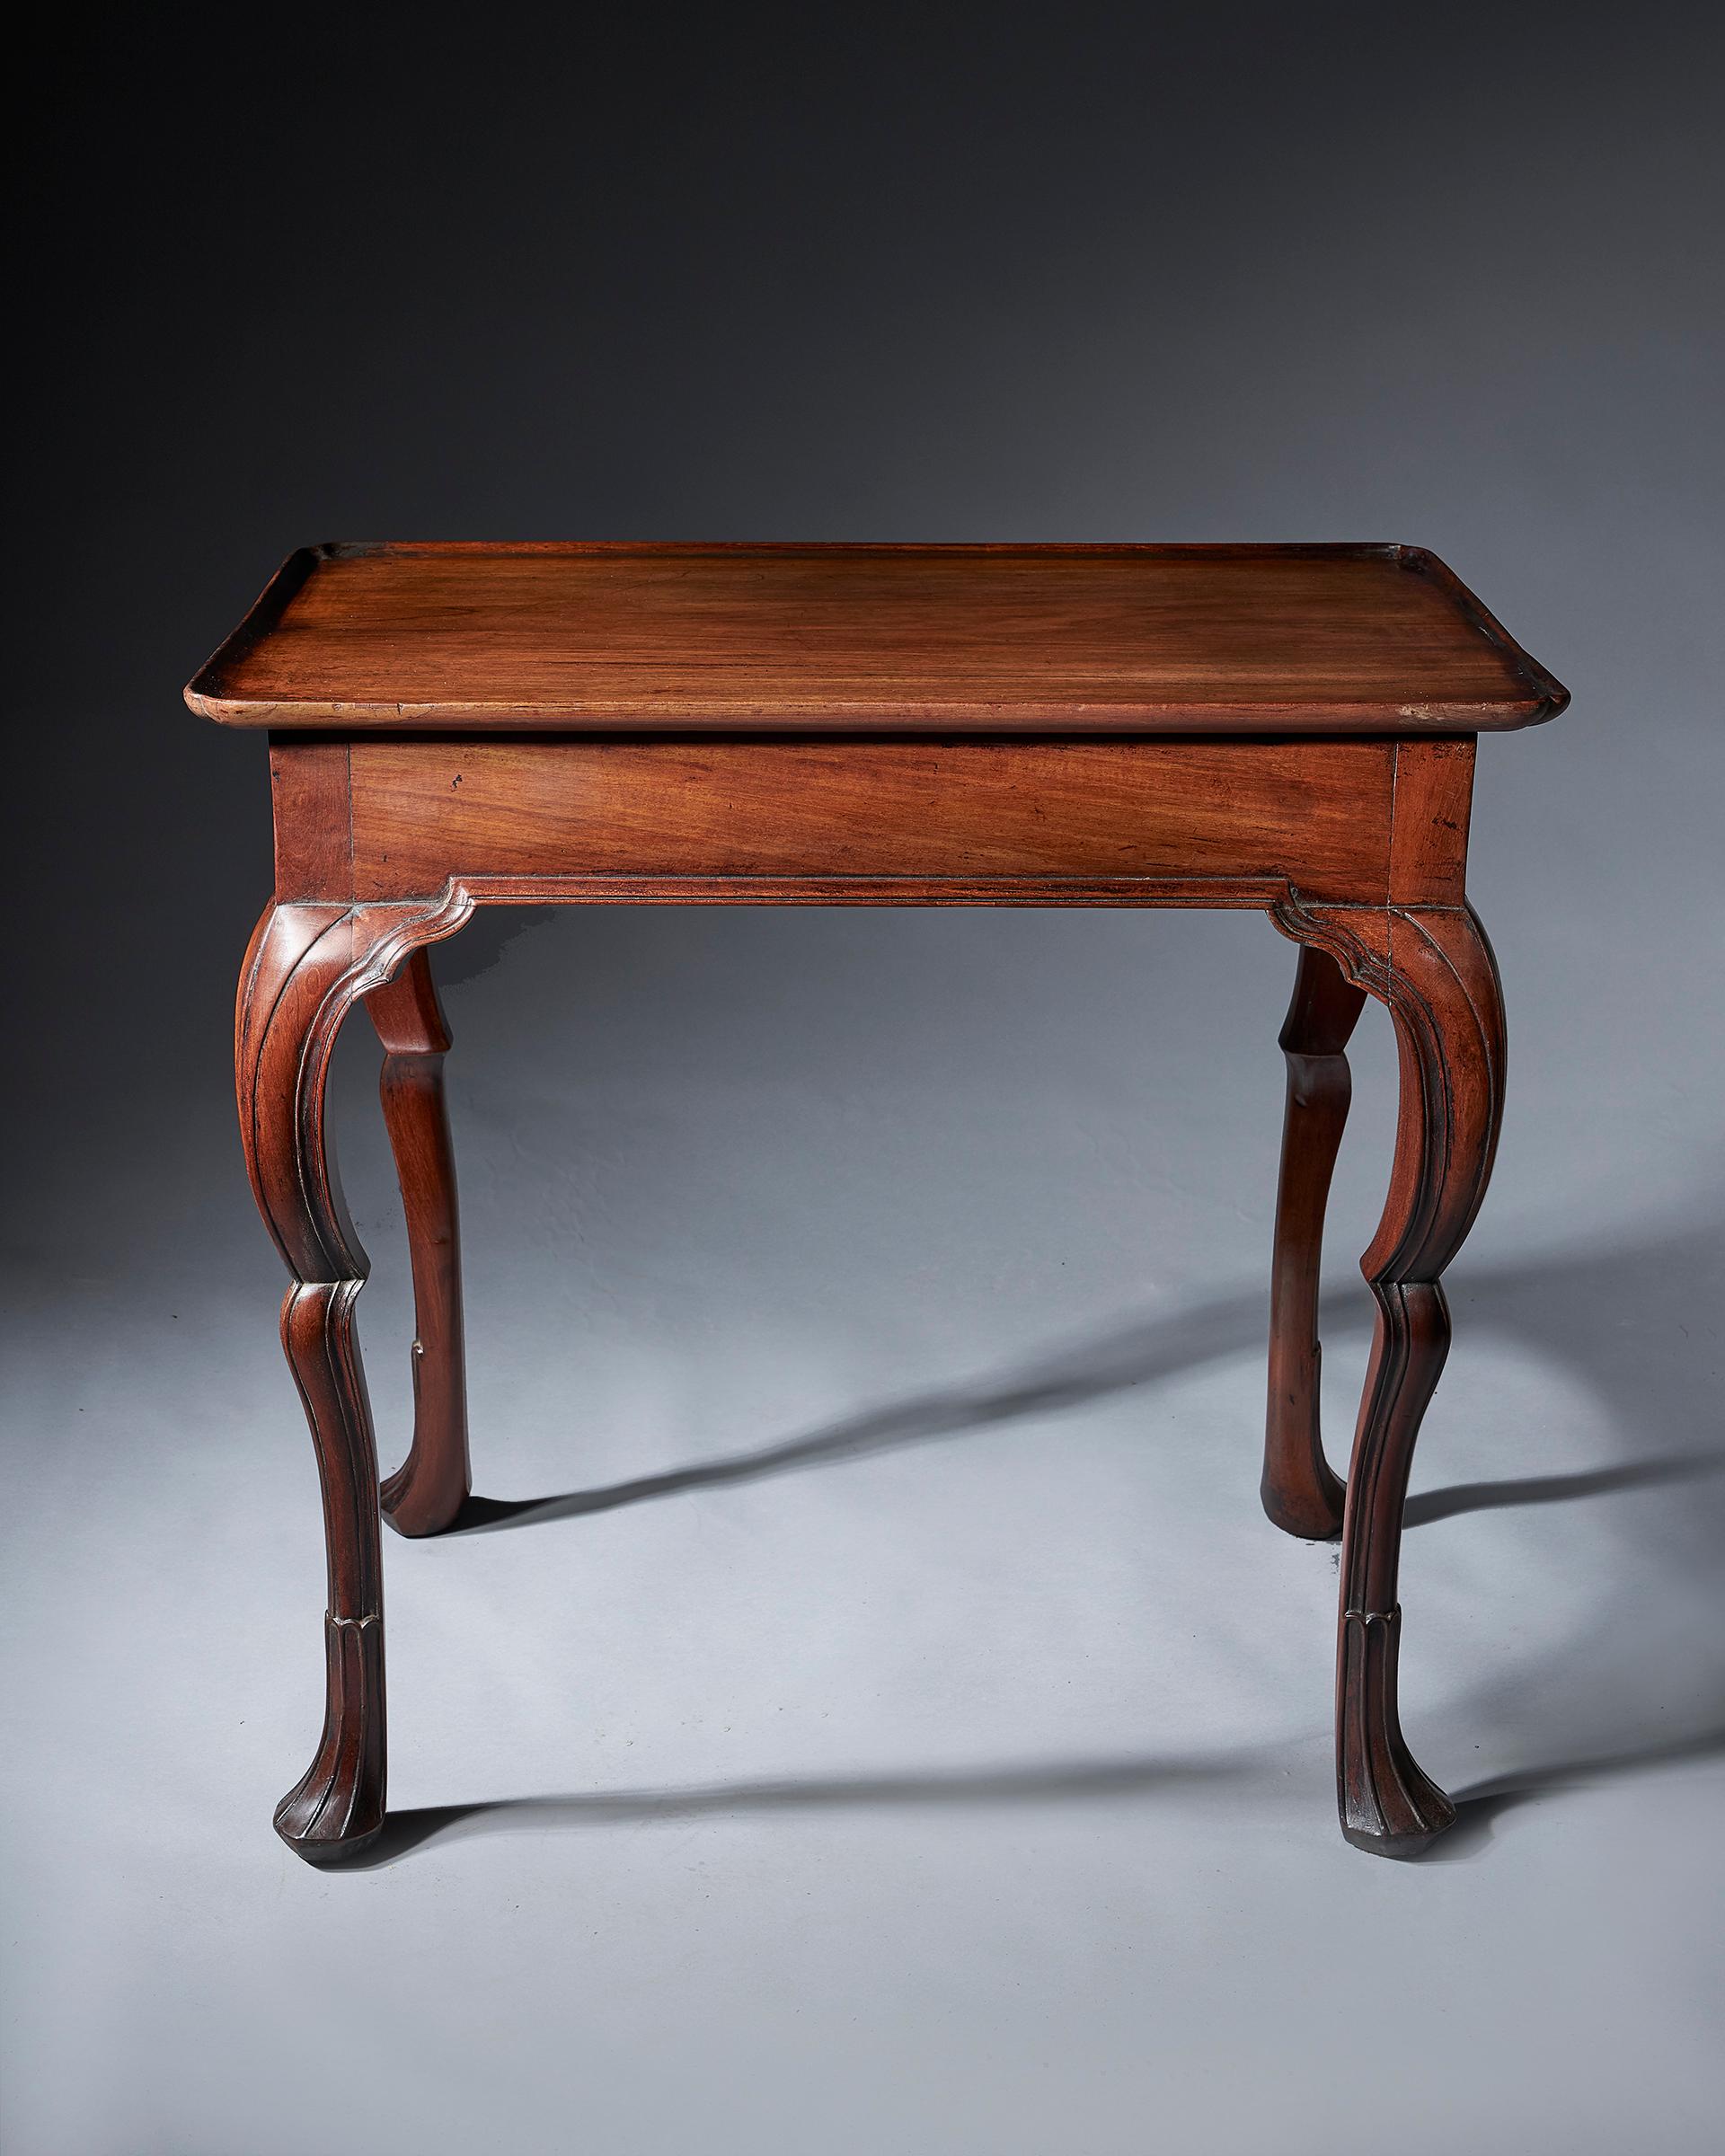 An important early 18th century Irish silver or tea table, circa 1740-1750. 

The solid mahogany top is relife carved to form a moulding with re-entrant corners. Similarly, the frieze is moulded to all faces allowing the table to stand freely. The